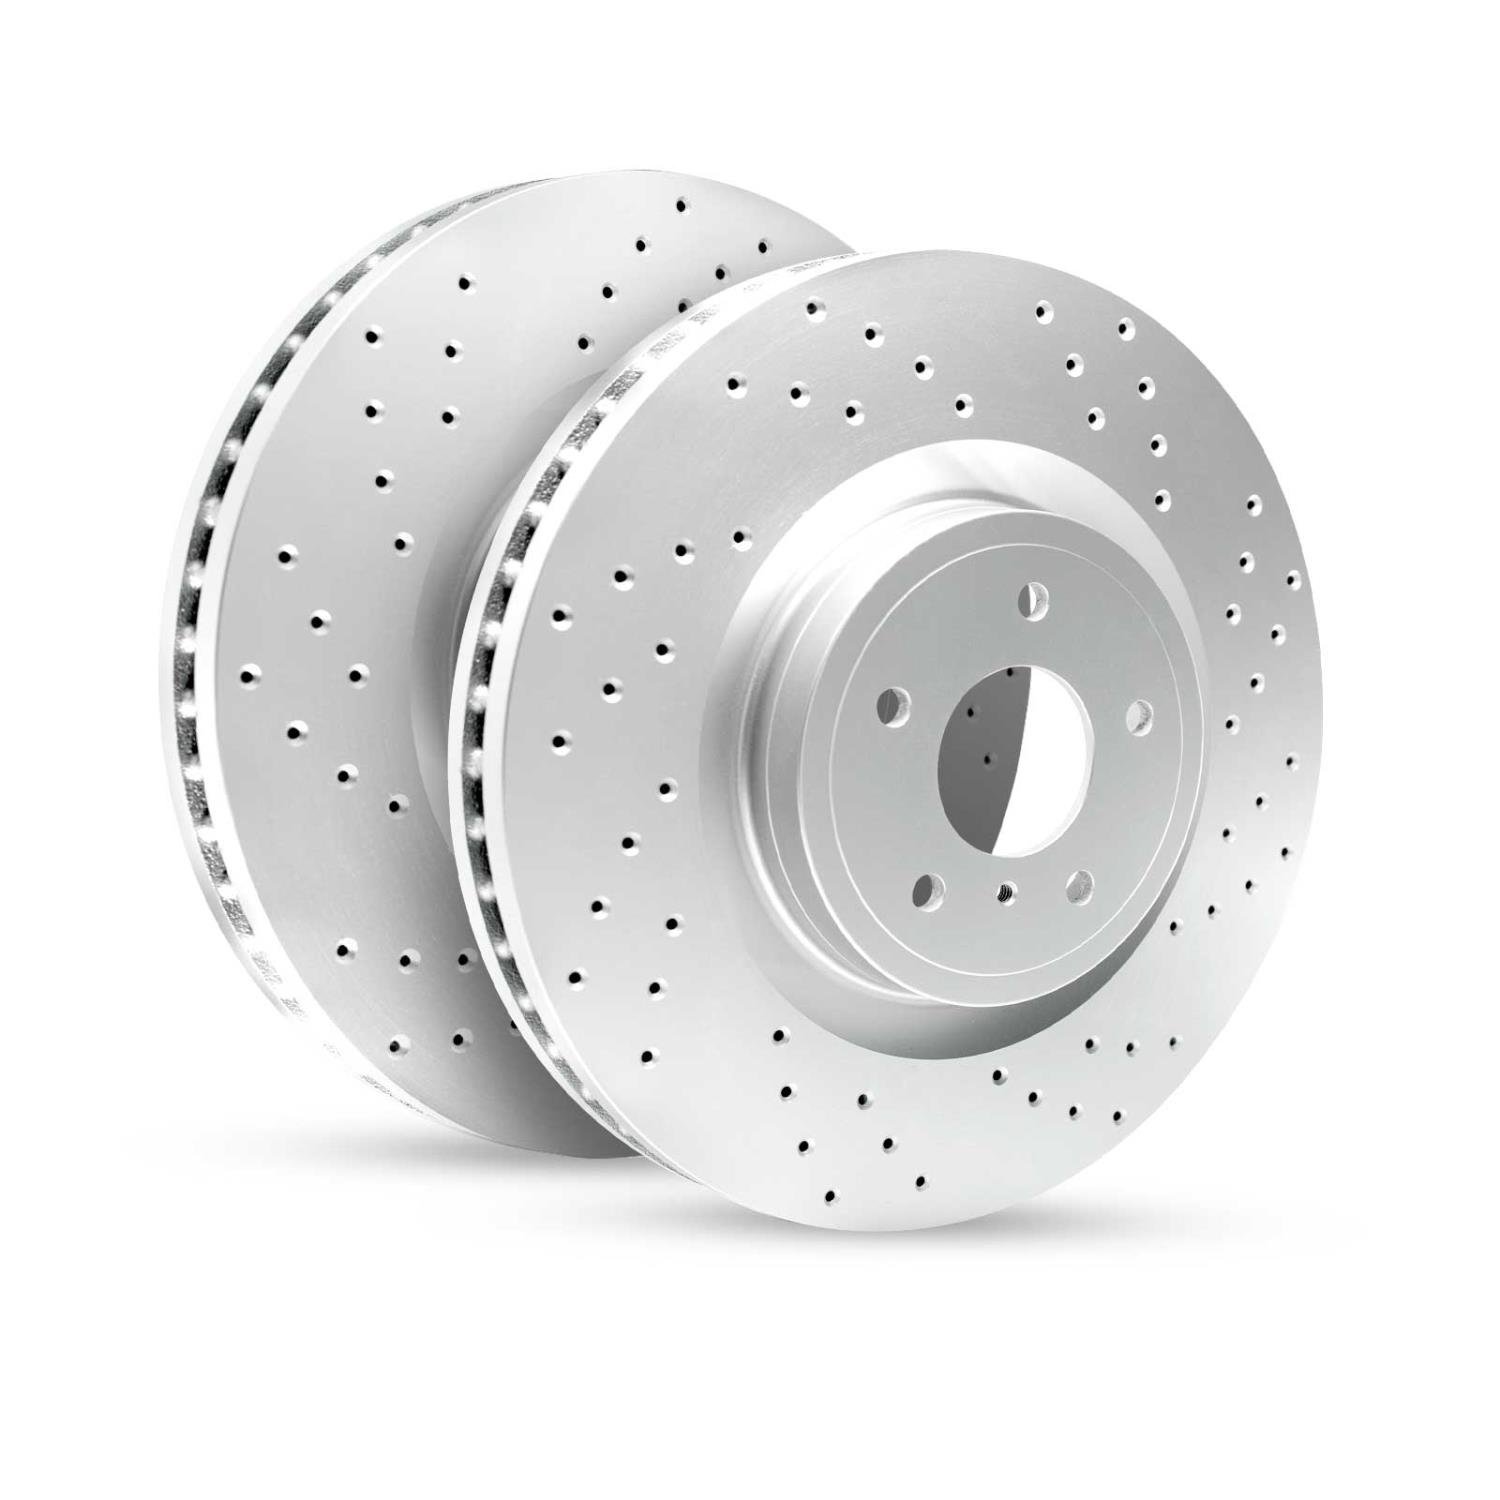 GEO-Carbon Drilled/Slotted Rotors, 1998-2015 Ford/Mazda,